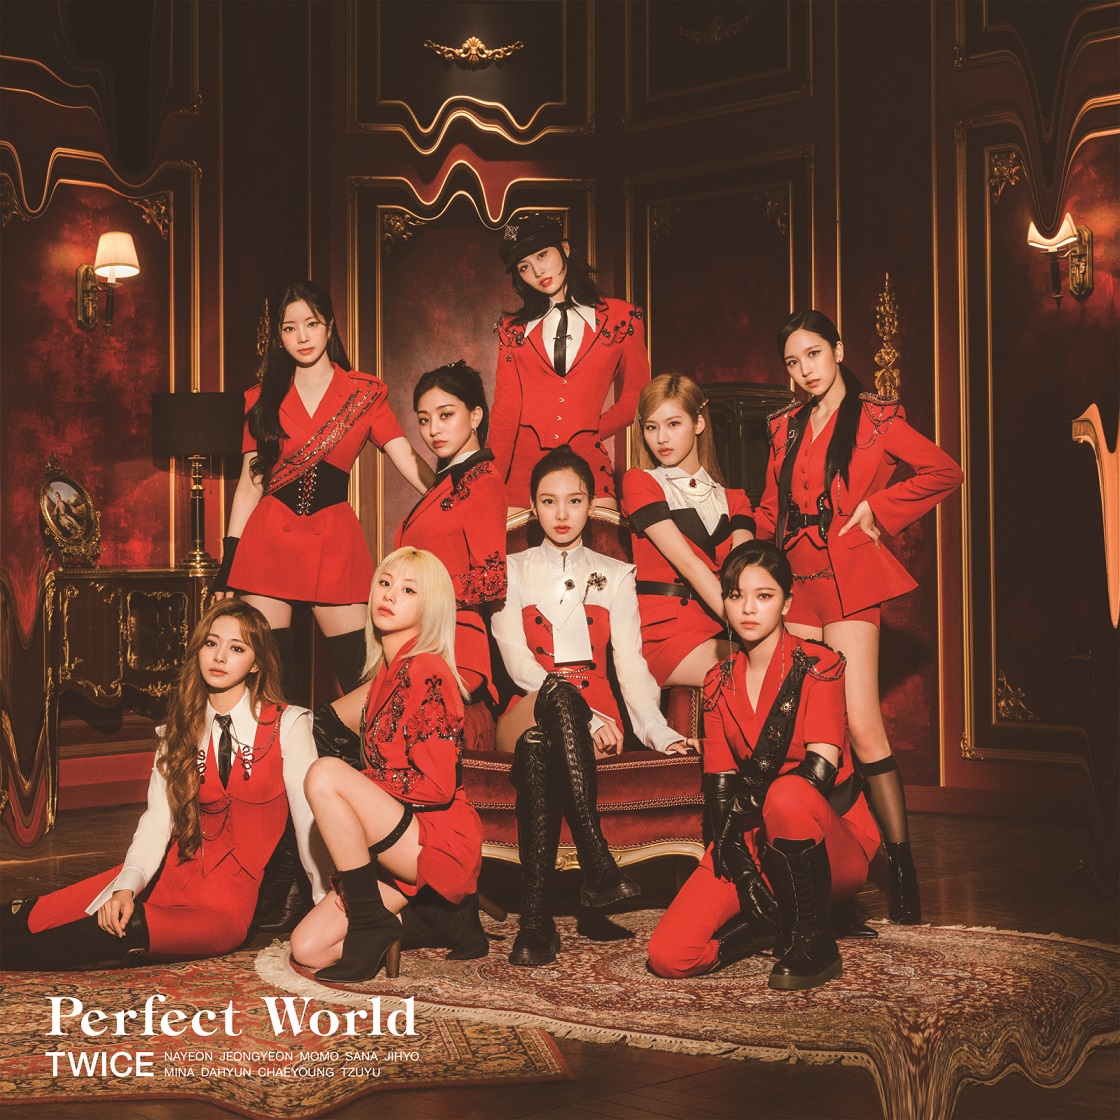 Cover for『TWICE - Four-leaf Clover』from the release『Perfect World』